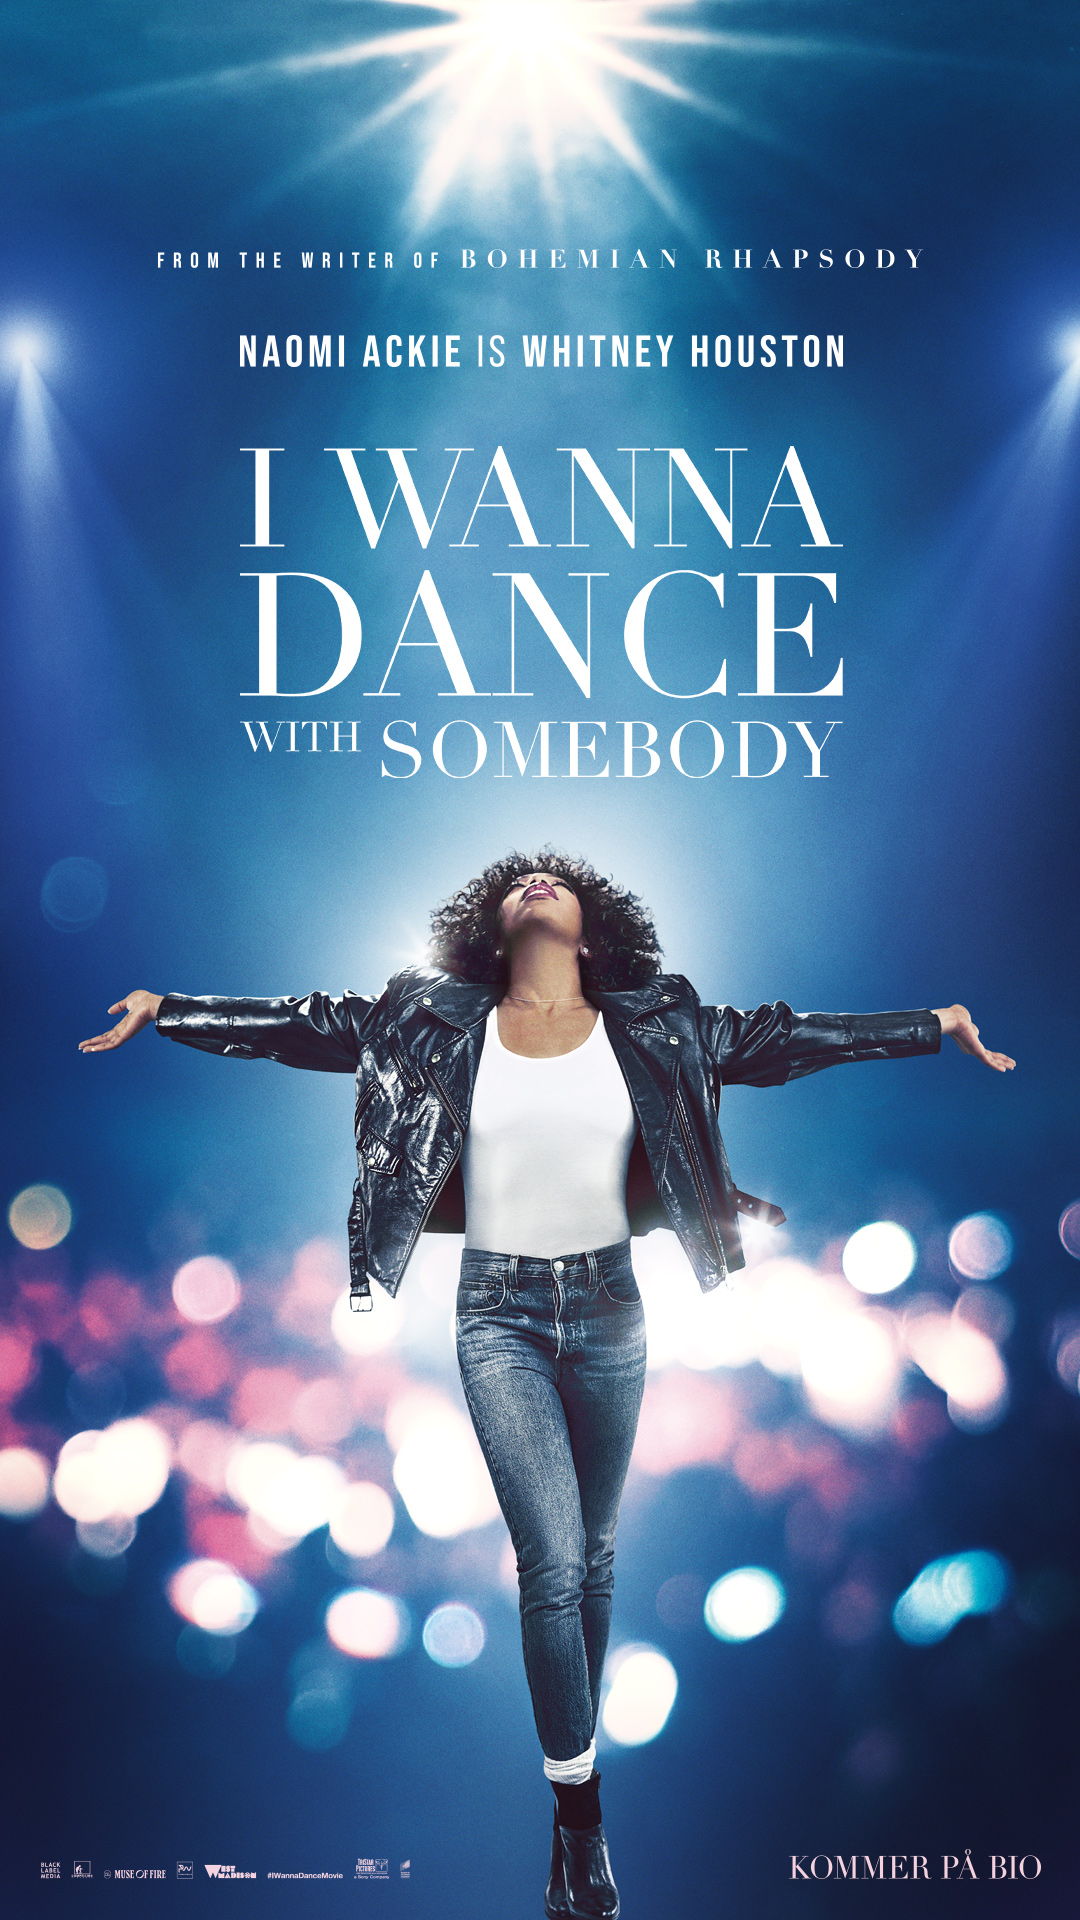 I WANNA DANCE WITH SOMEBODY